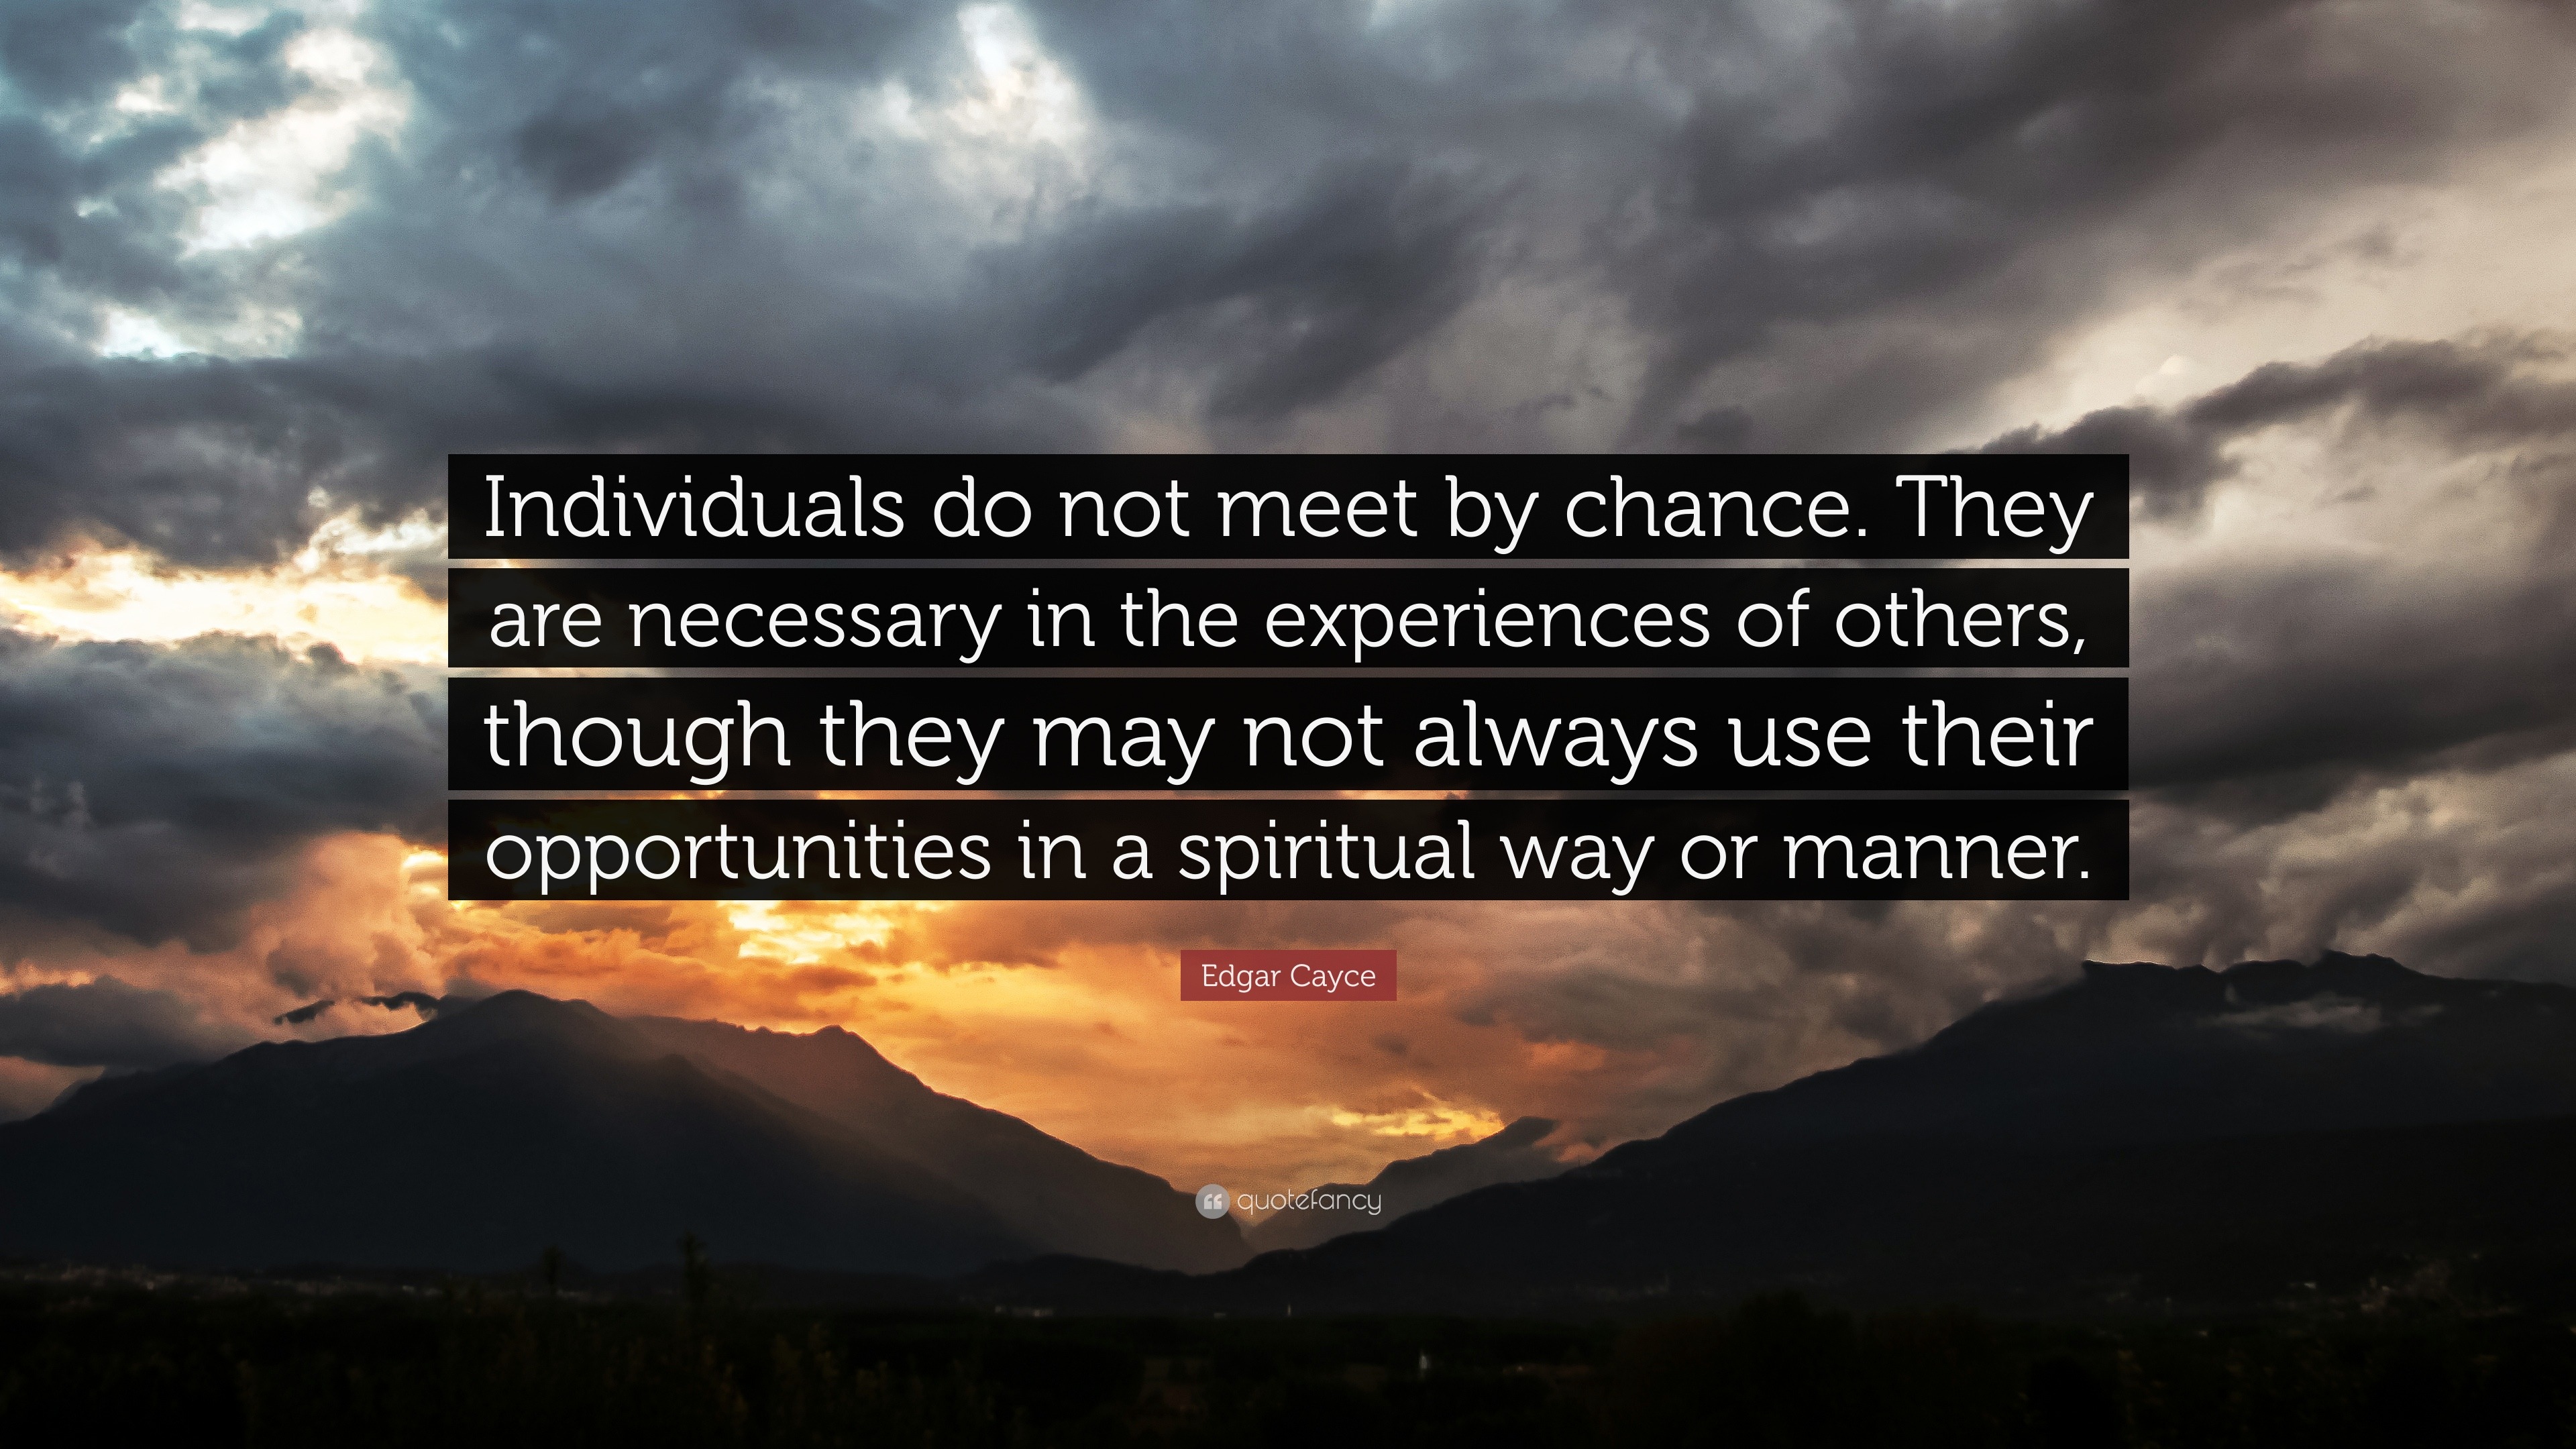 Edgar Cayce Quote: “Individuals do not meet by chance. They are ...